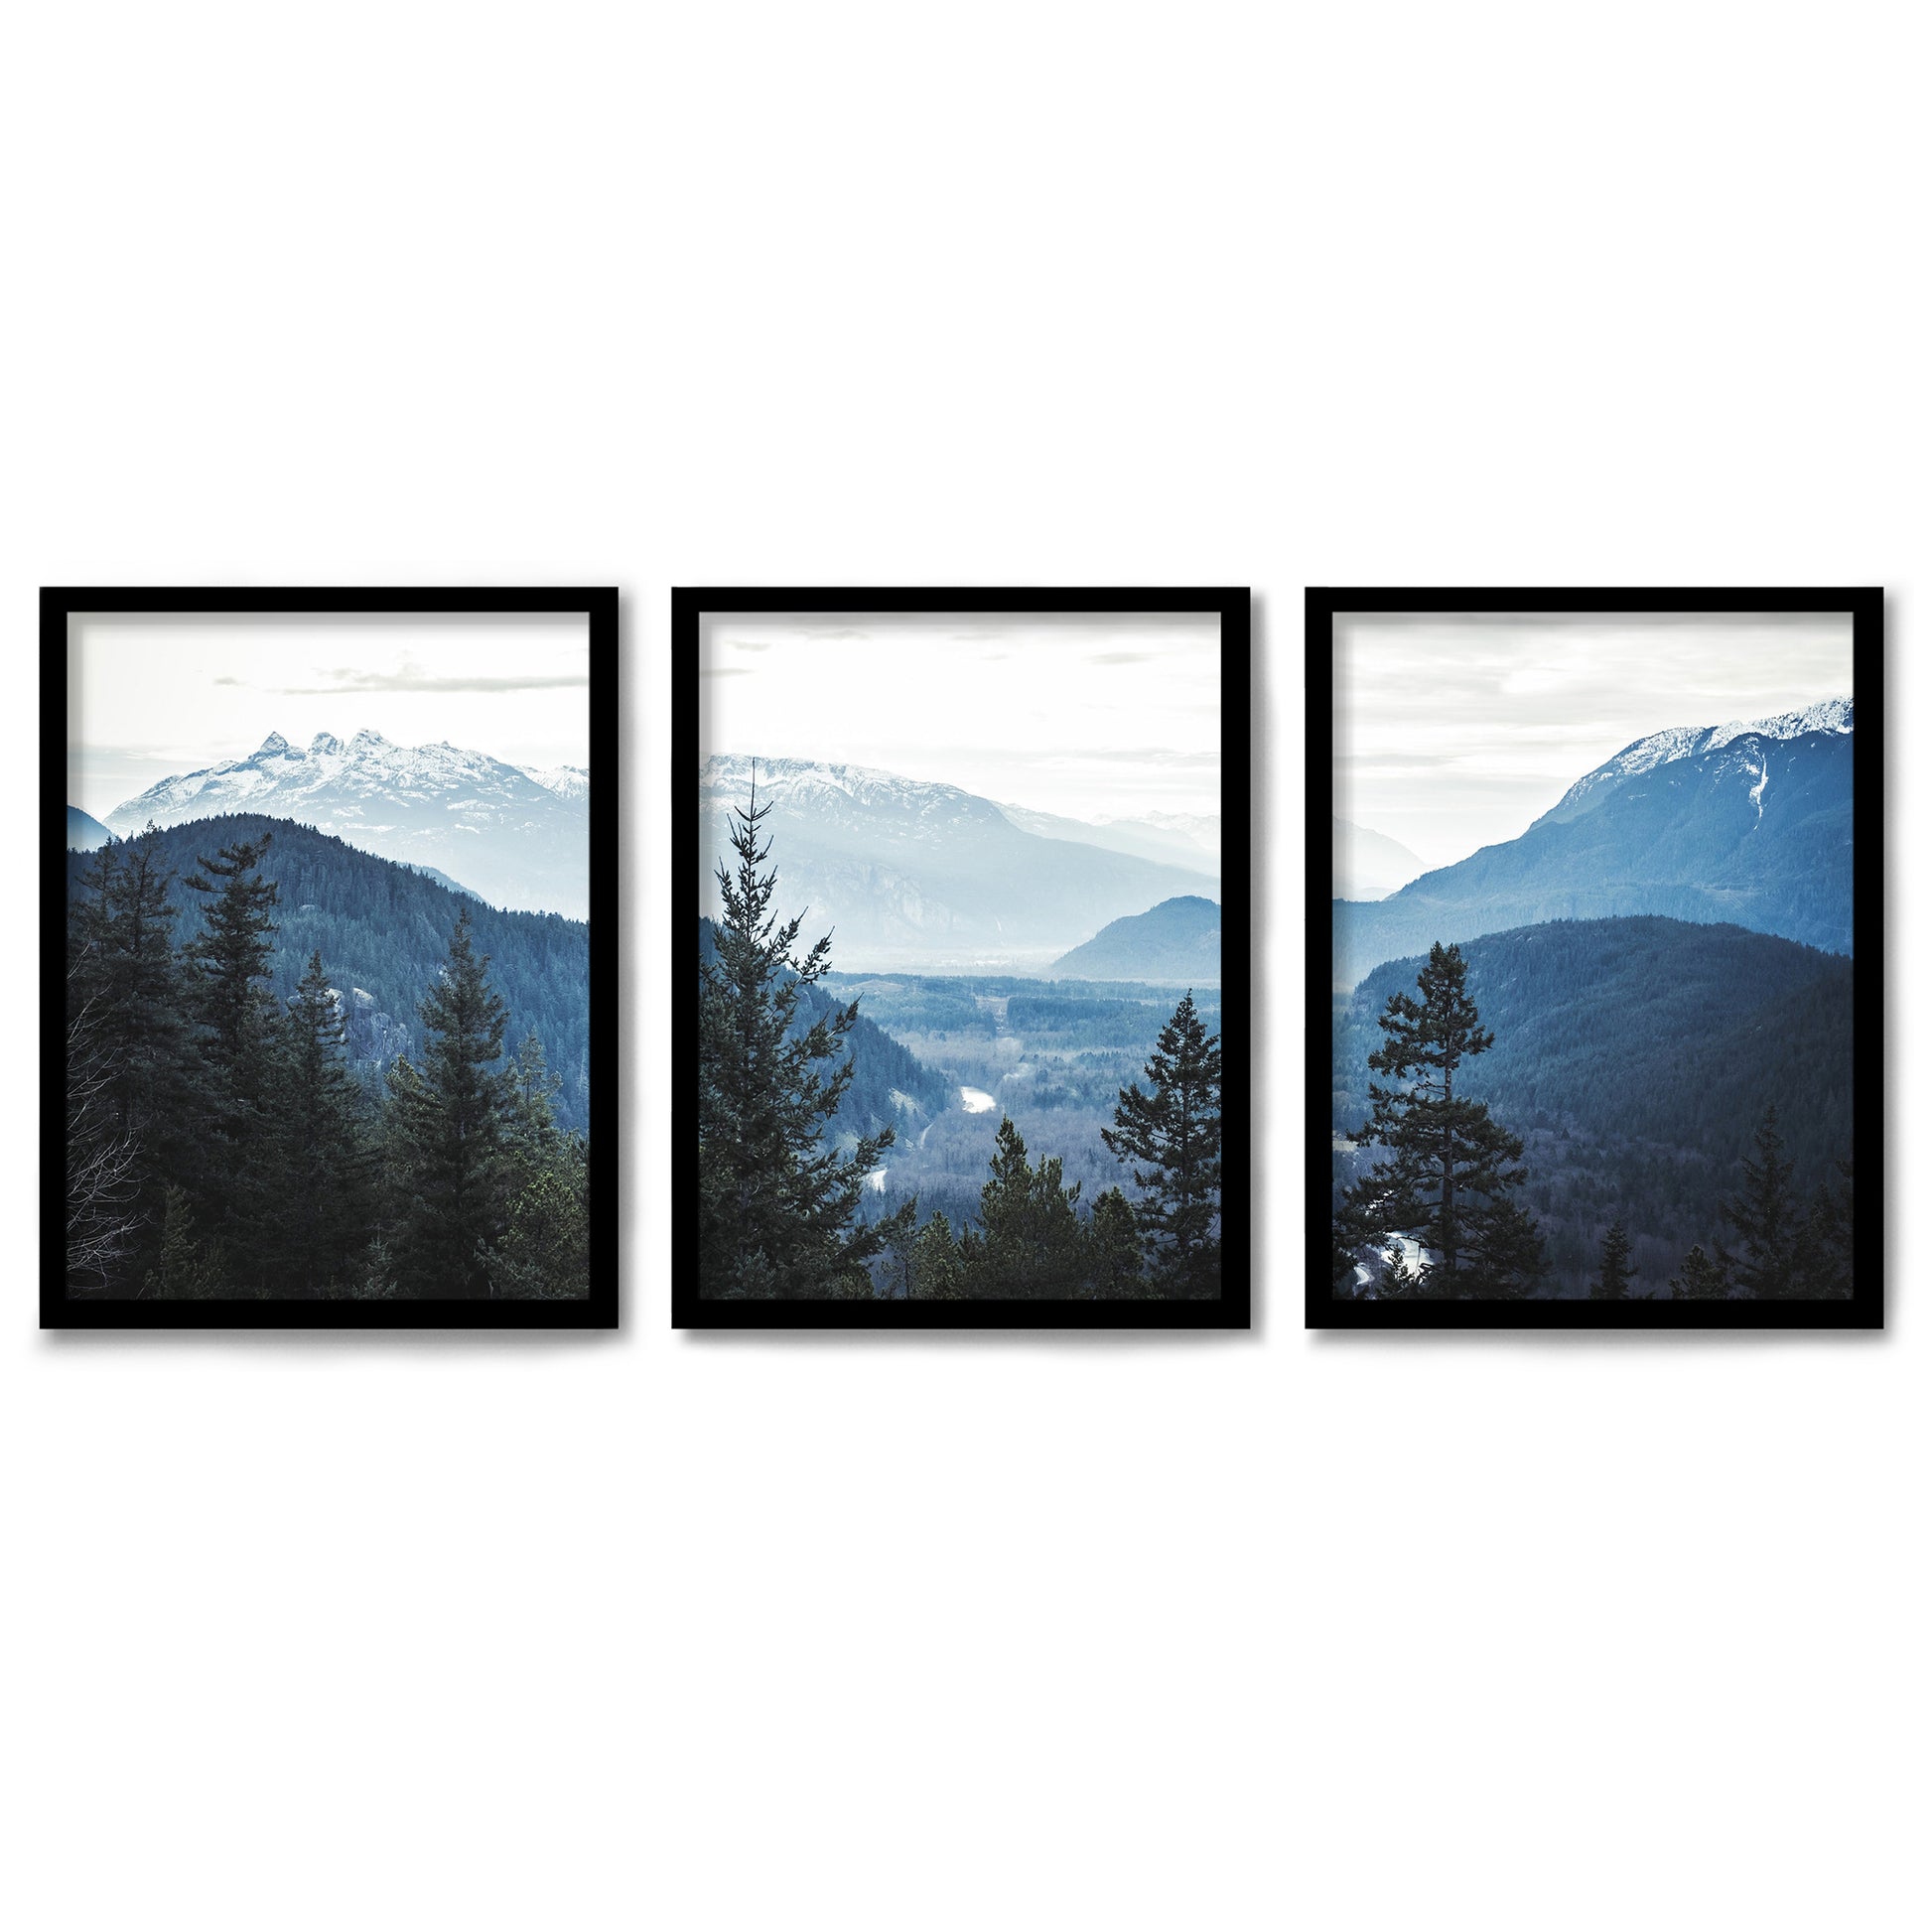 Morning Mountain Views by Tanya Shumkina 3 Piece Framed Triptych 